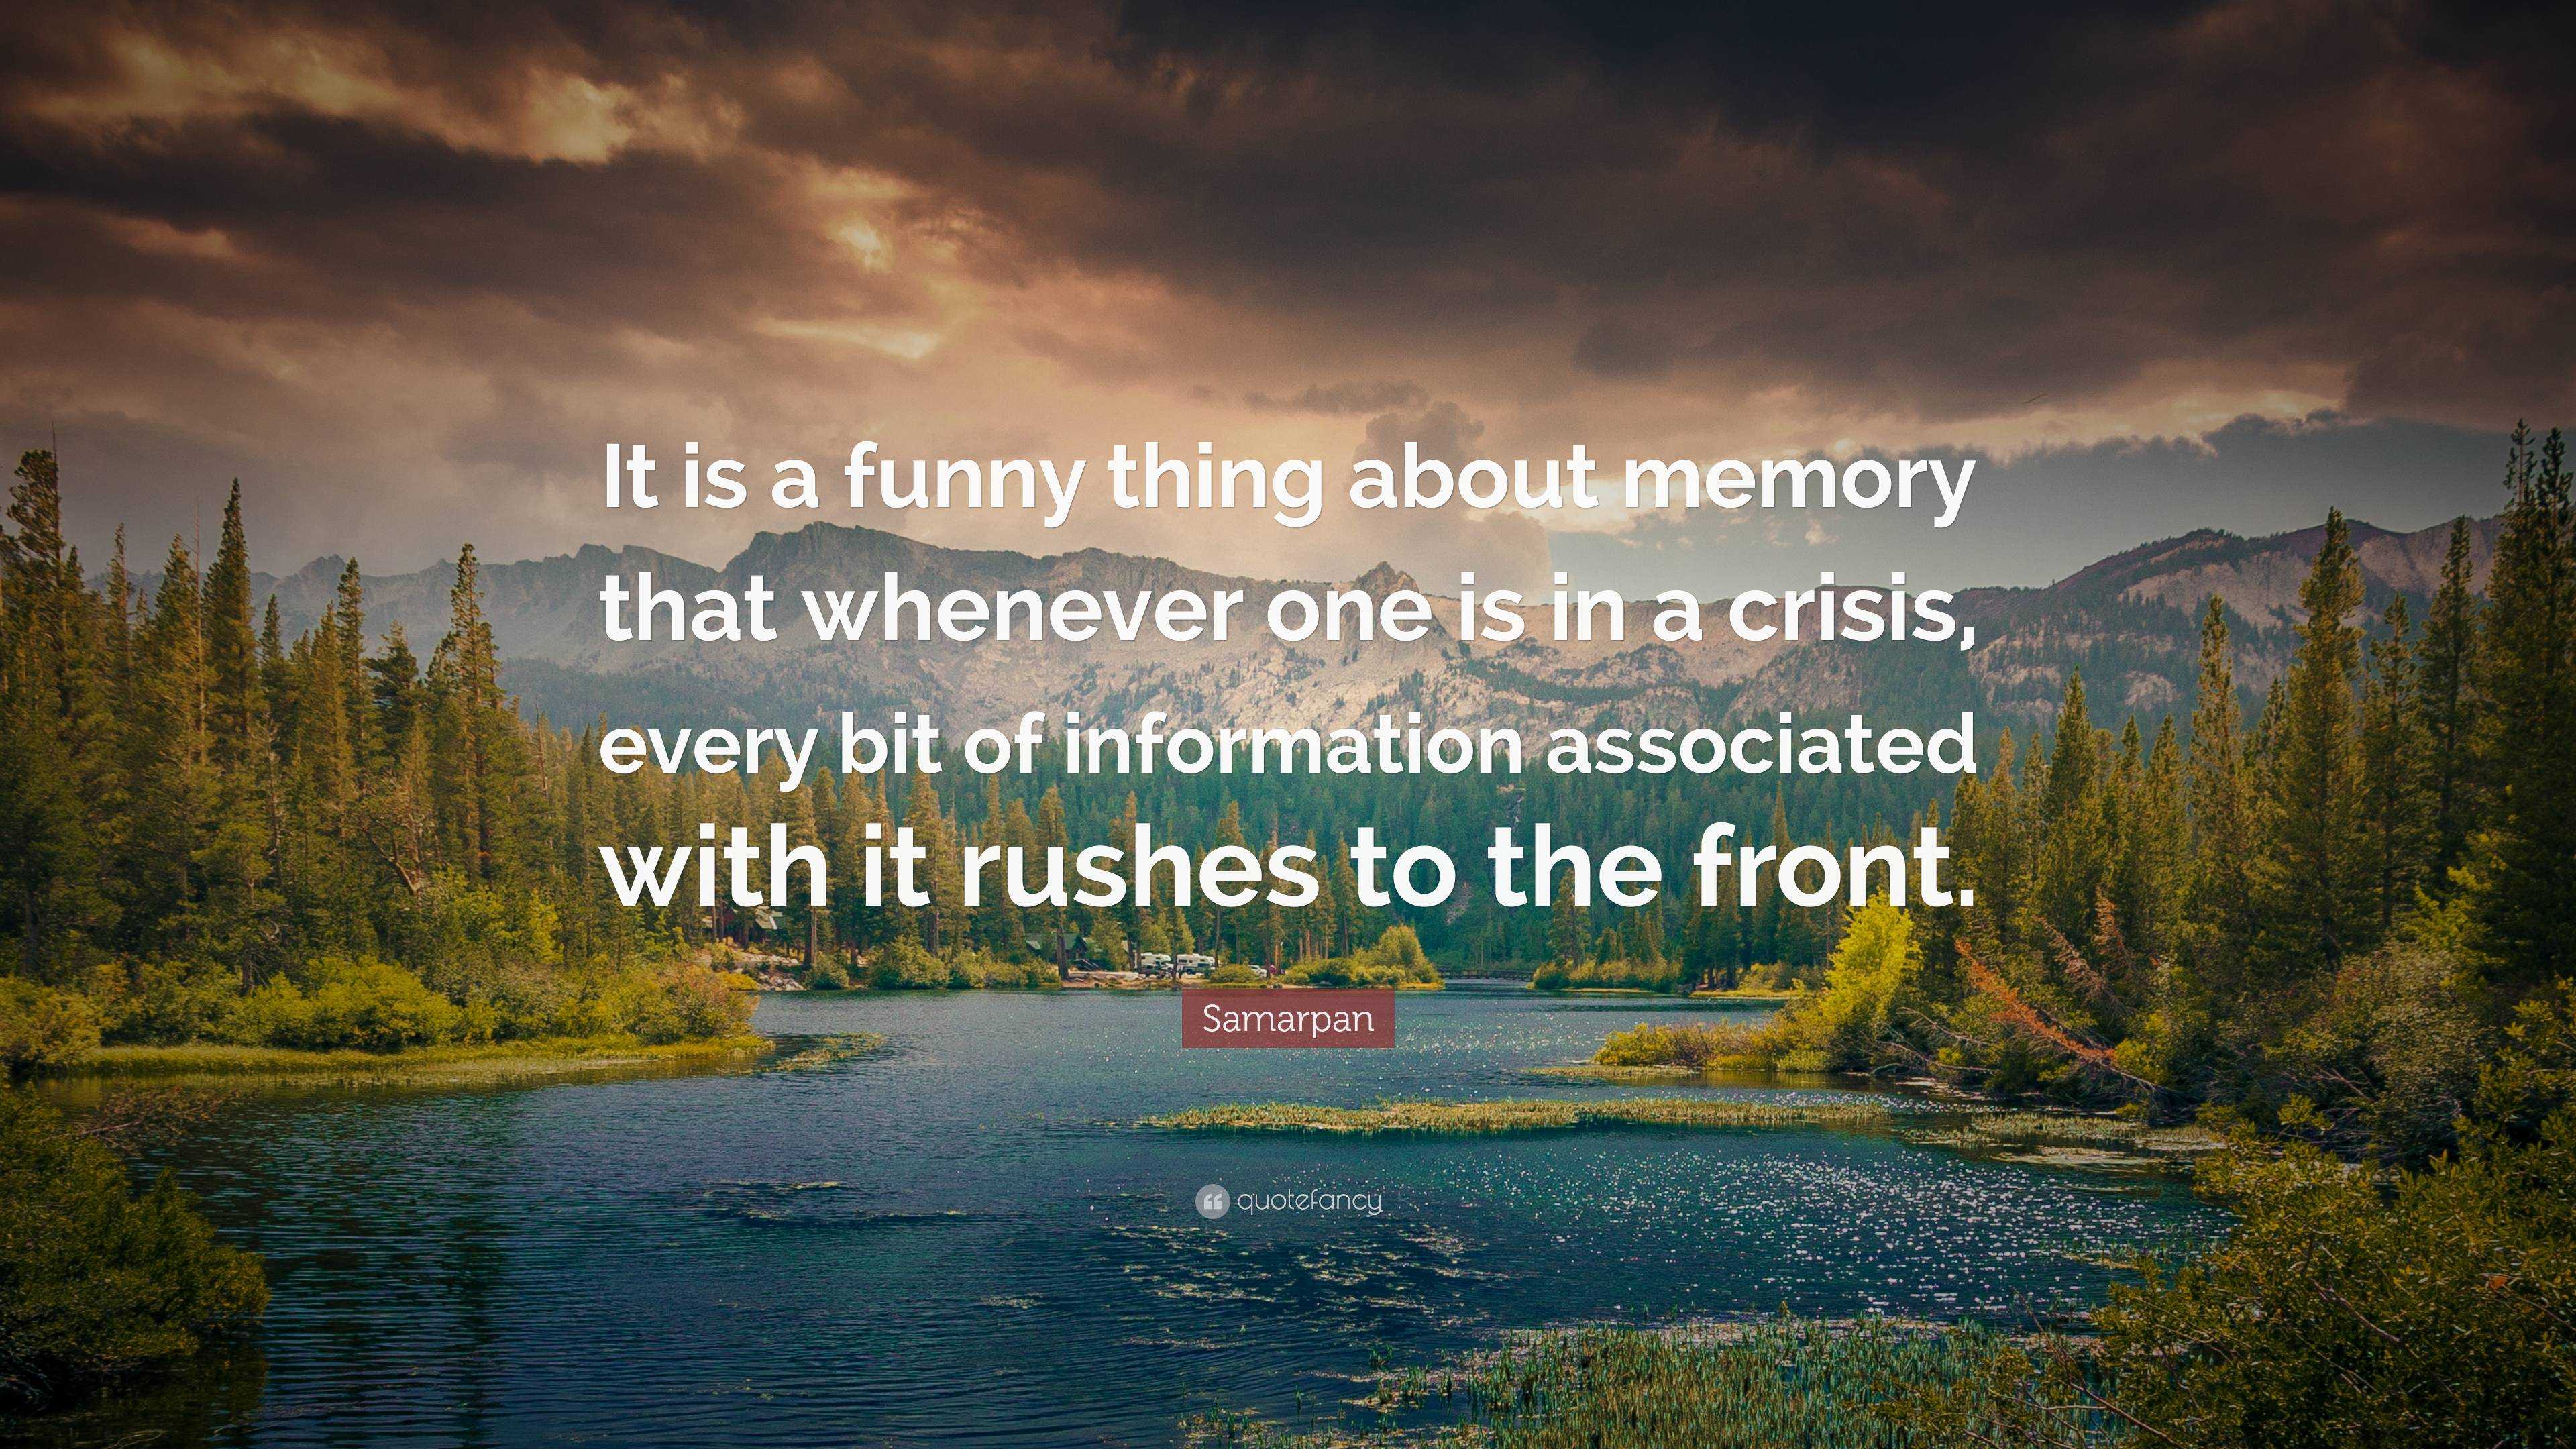 Samarpan Quote: “It is a funny thing about memory that whenever one is in a  crisis, every bit of information associated with it rushes to...”